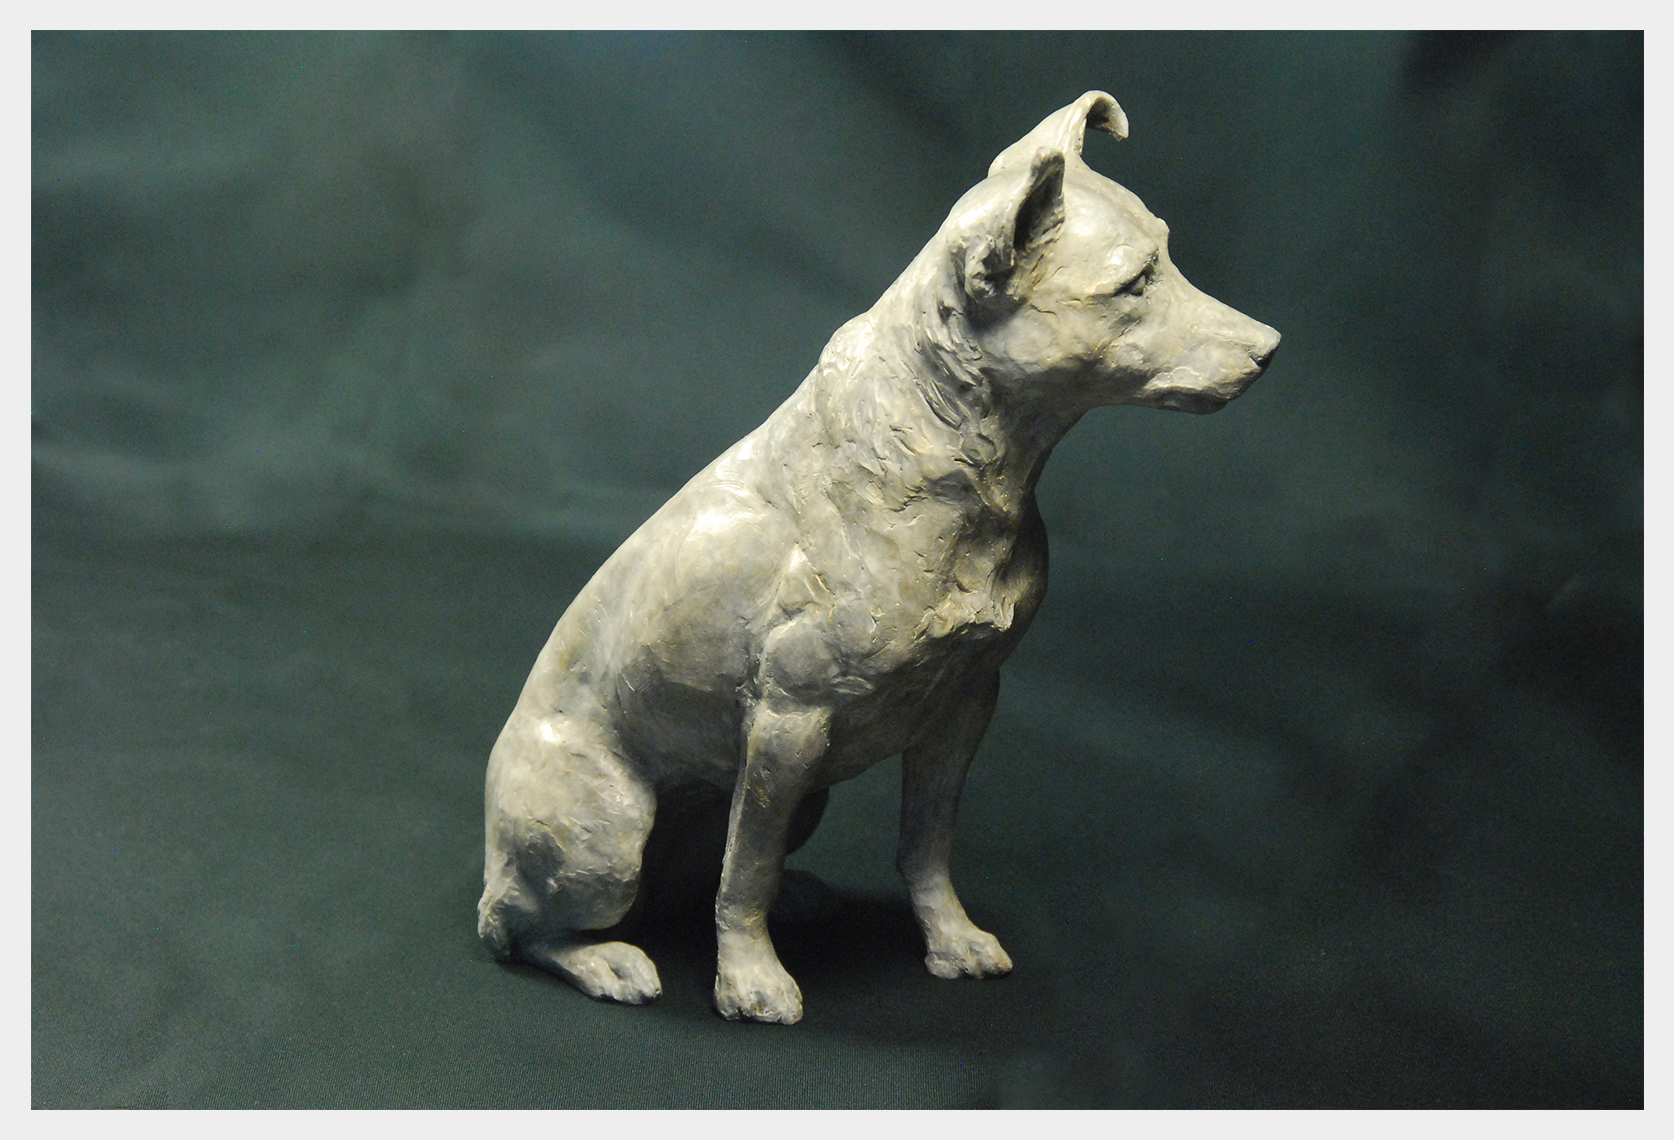 Realistic bronze sculpture of a Jack Russell Terrier dog alert and ready for action